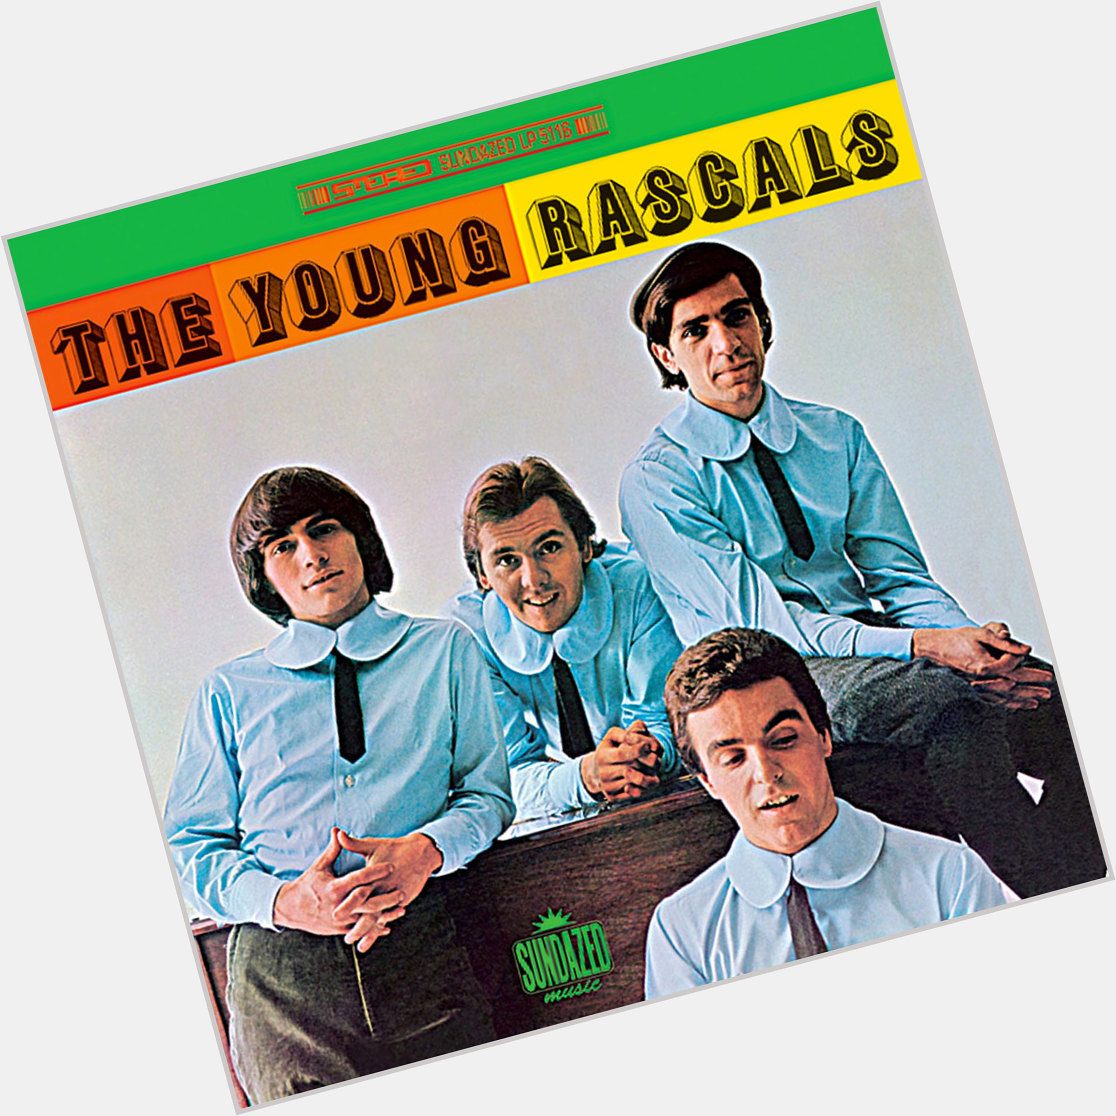 Happy Birthday to Gene Cornish, guitarist for the Young Rascals! 